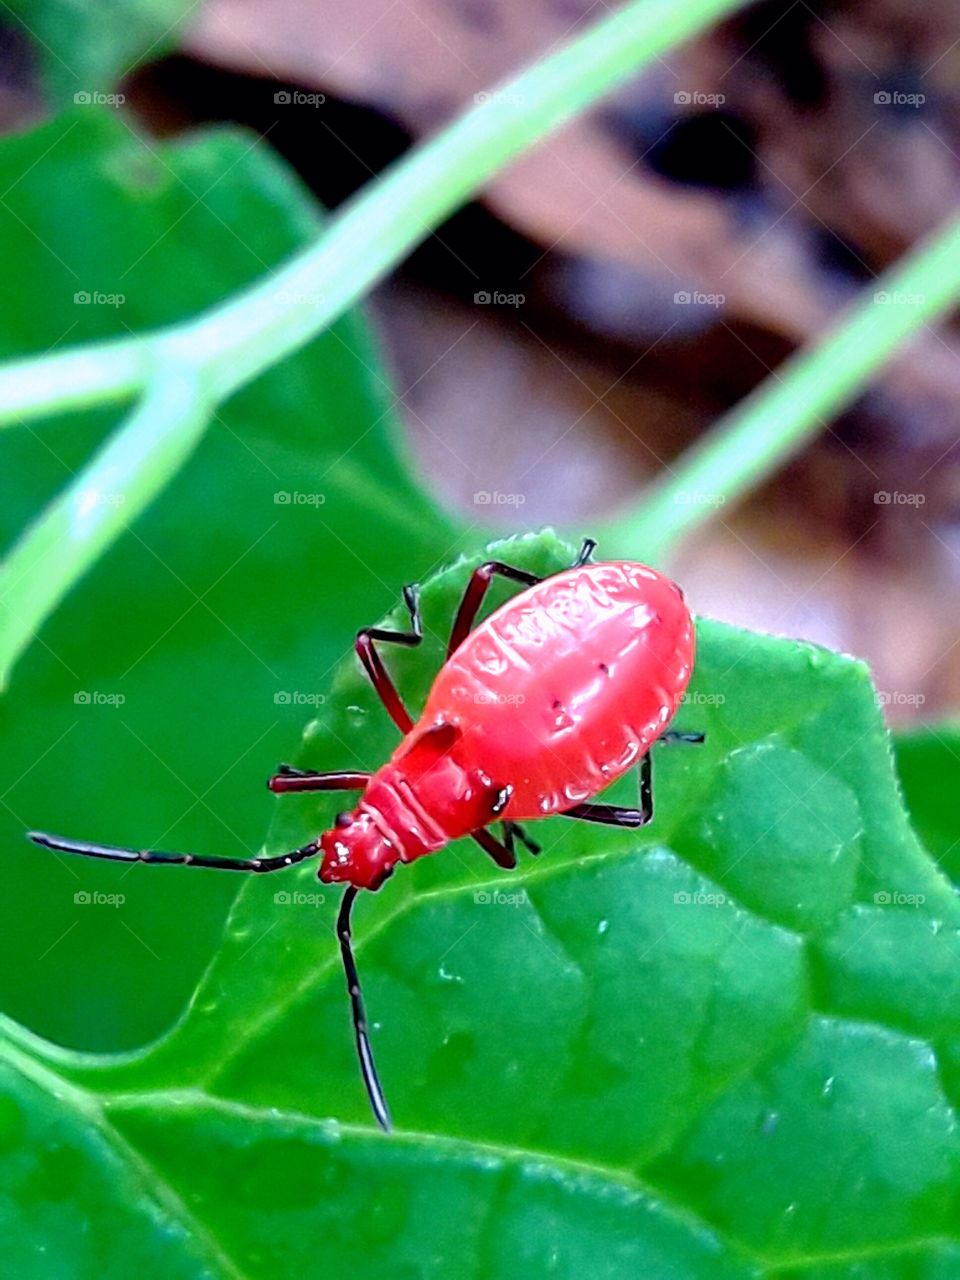 Cotton stainer, red body black legs insect on the green leaf.